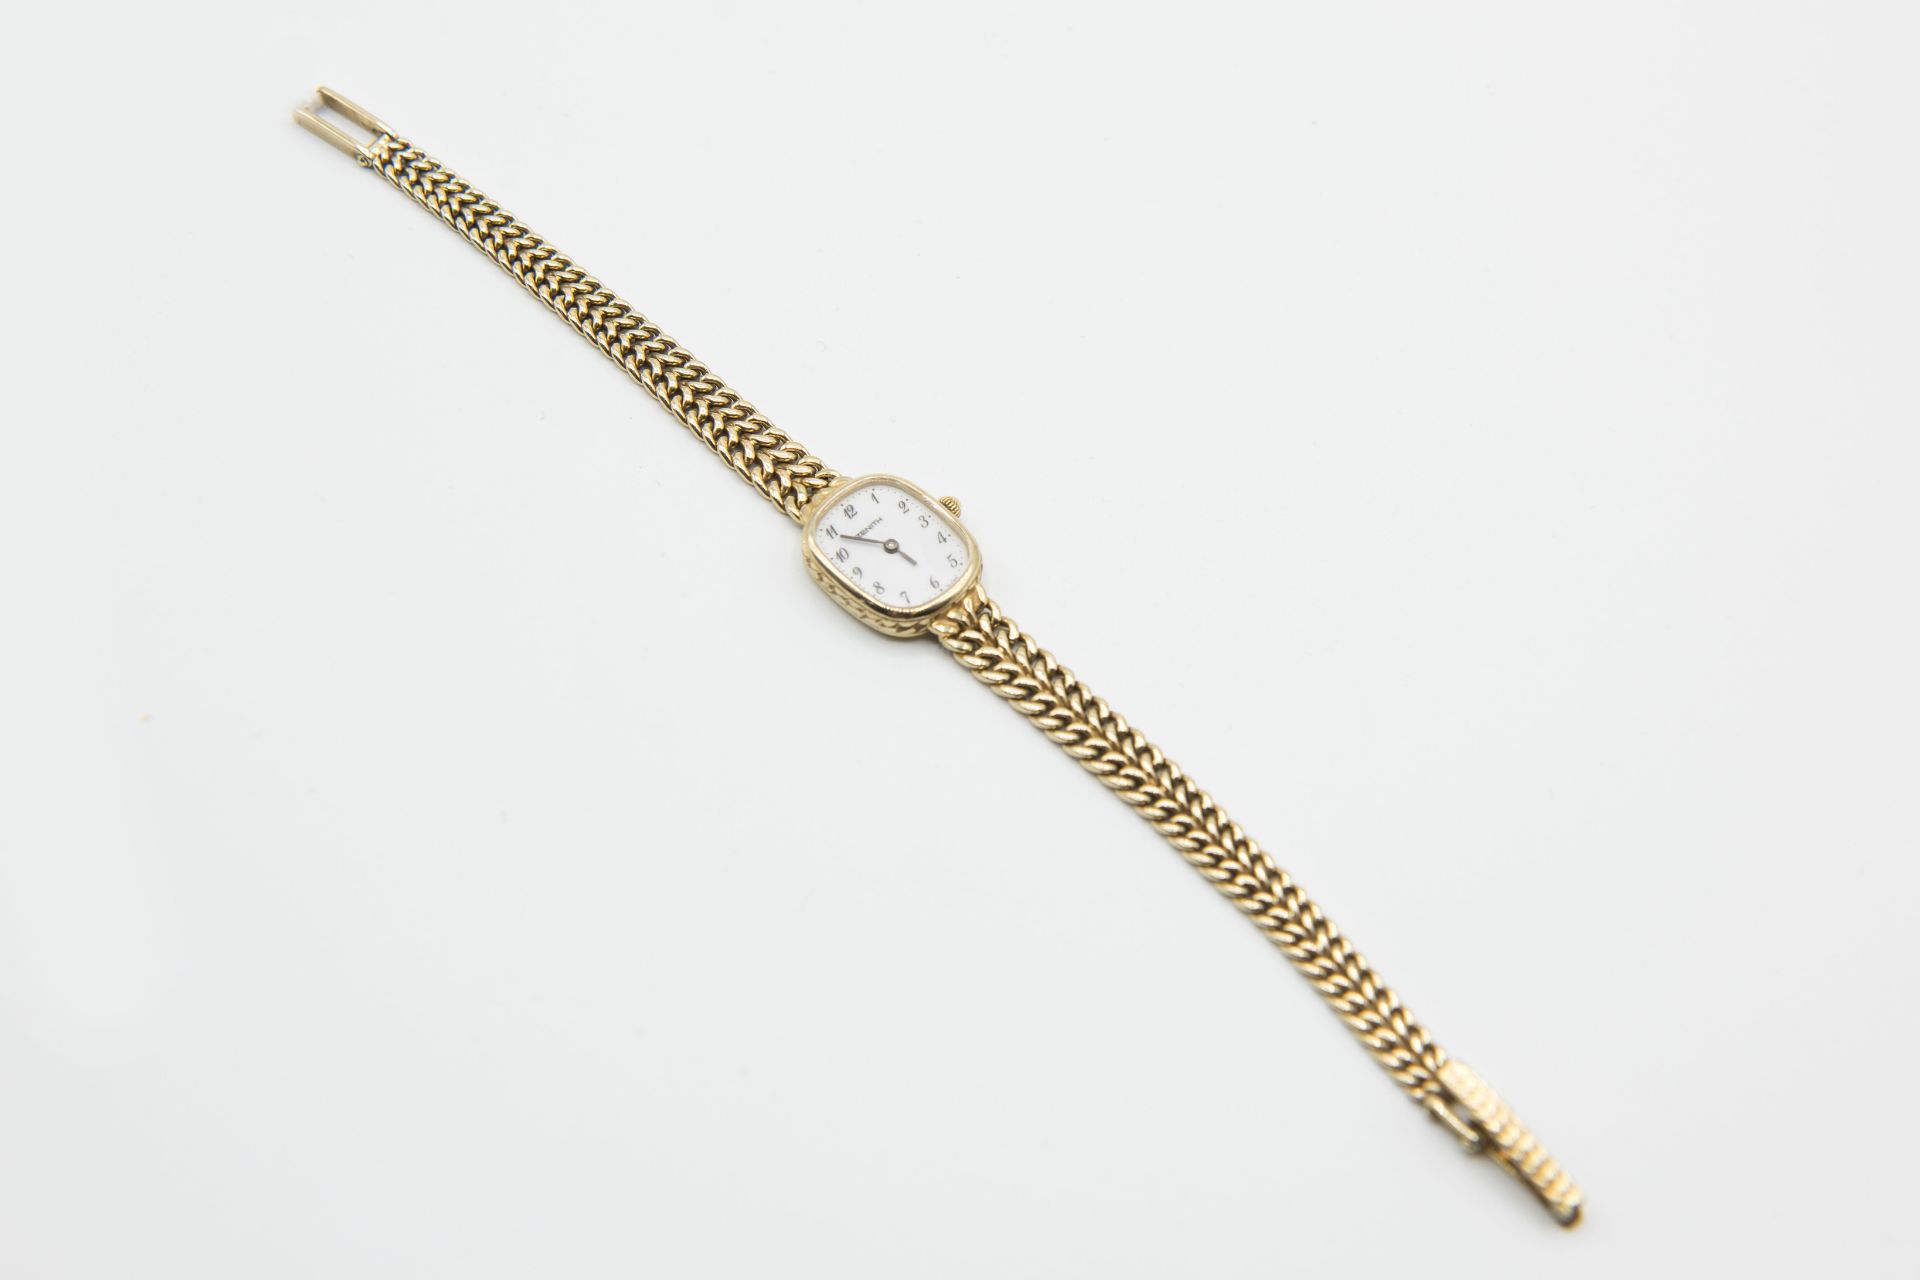 A LADYS 9CT GOLD ZENITH WATCH